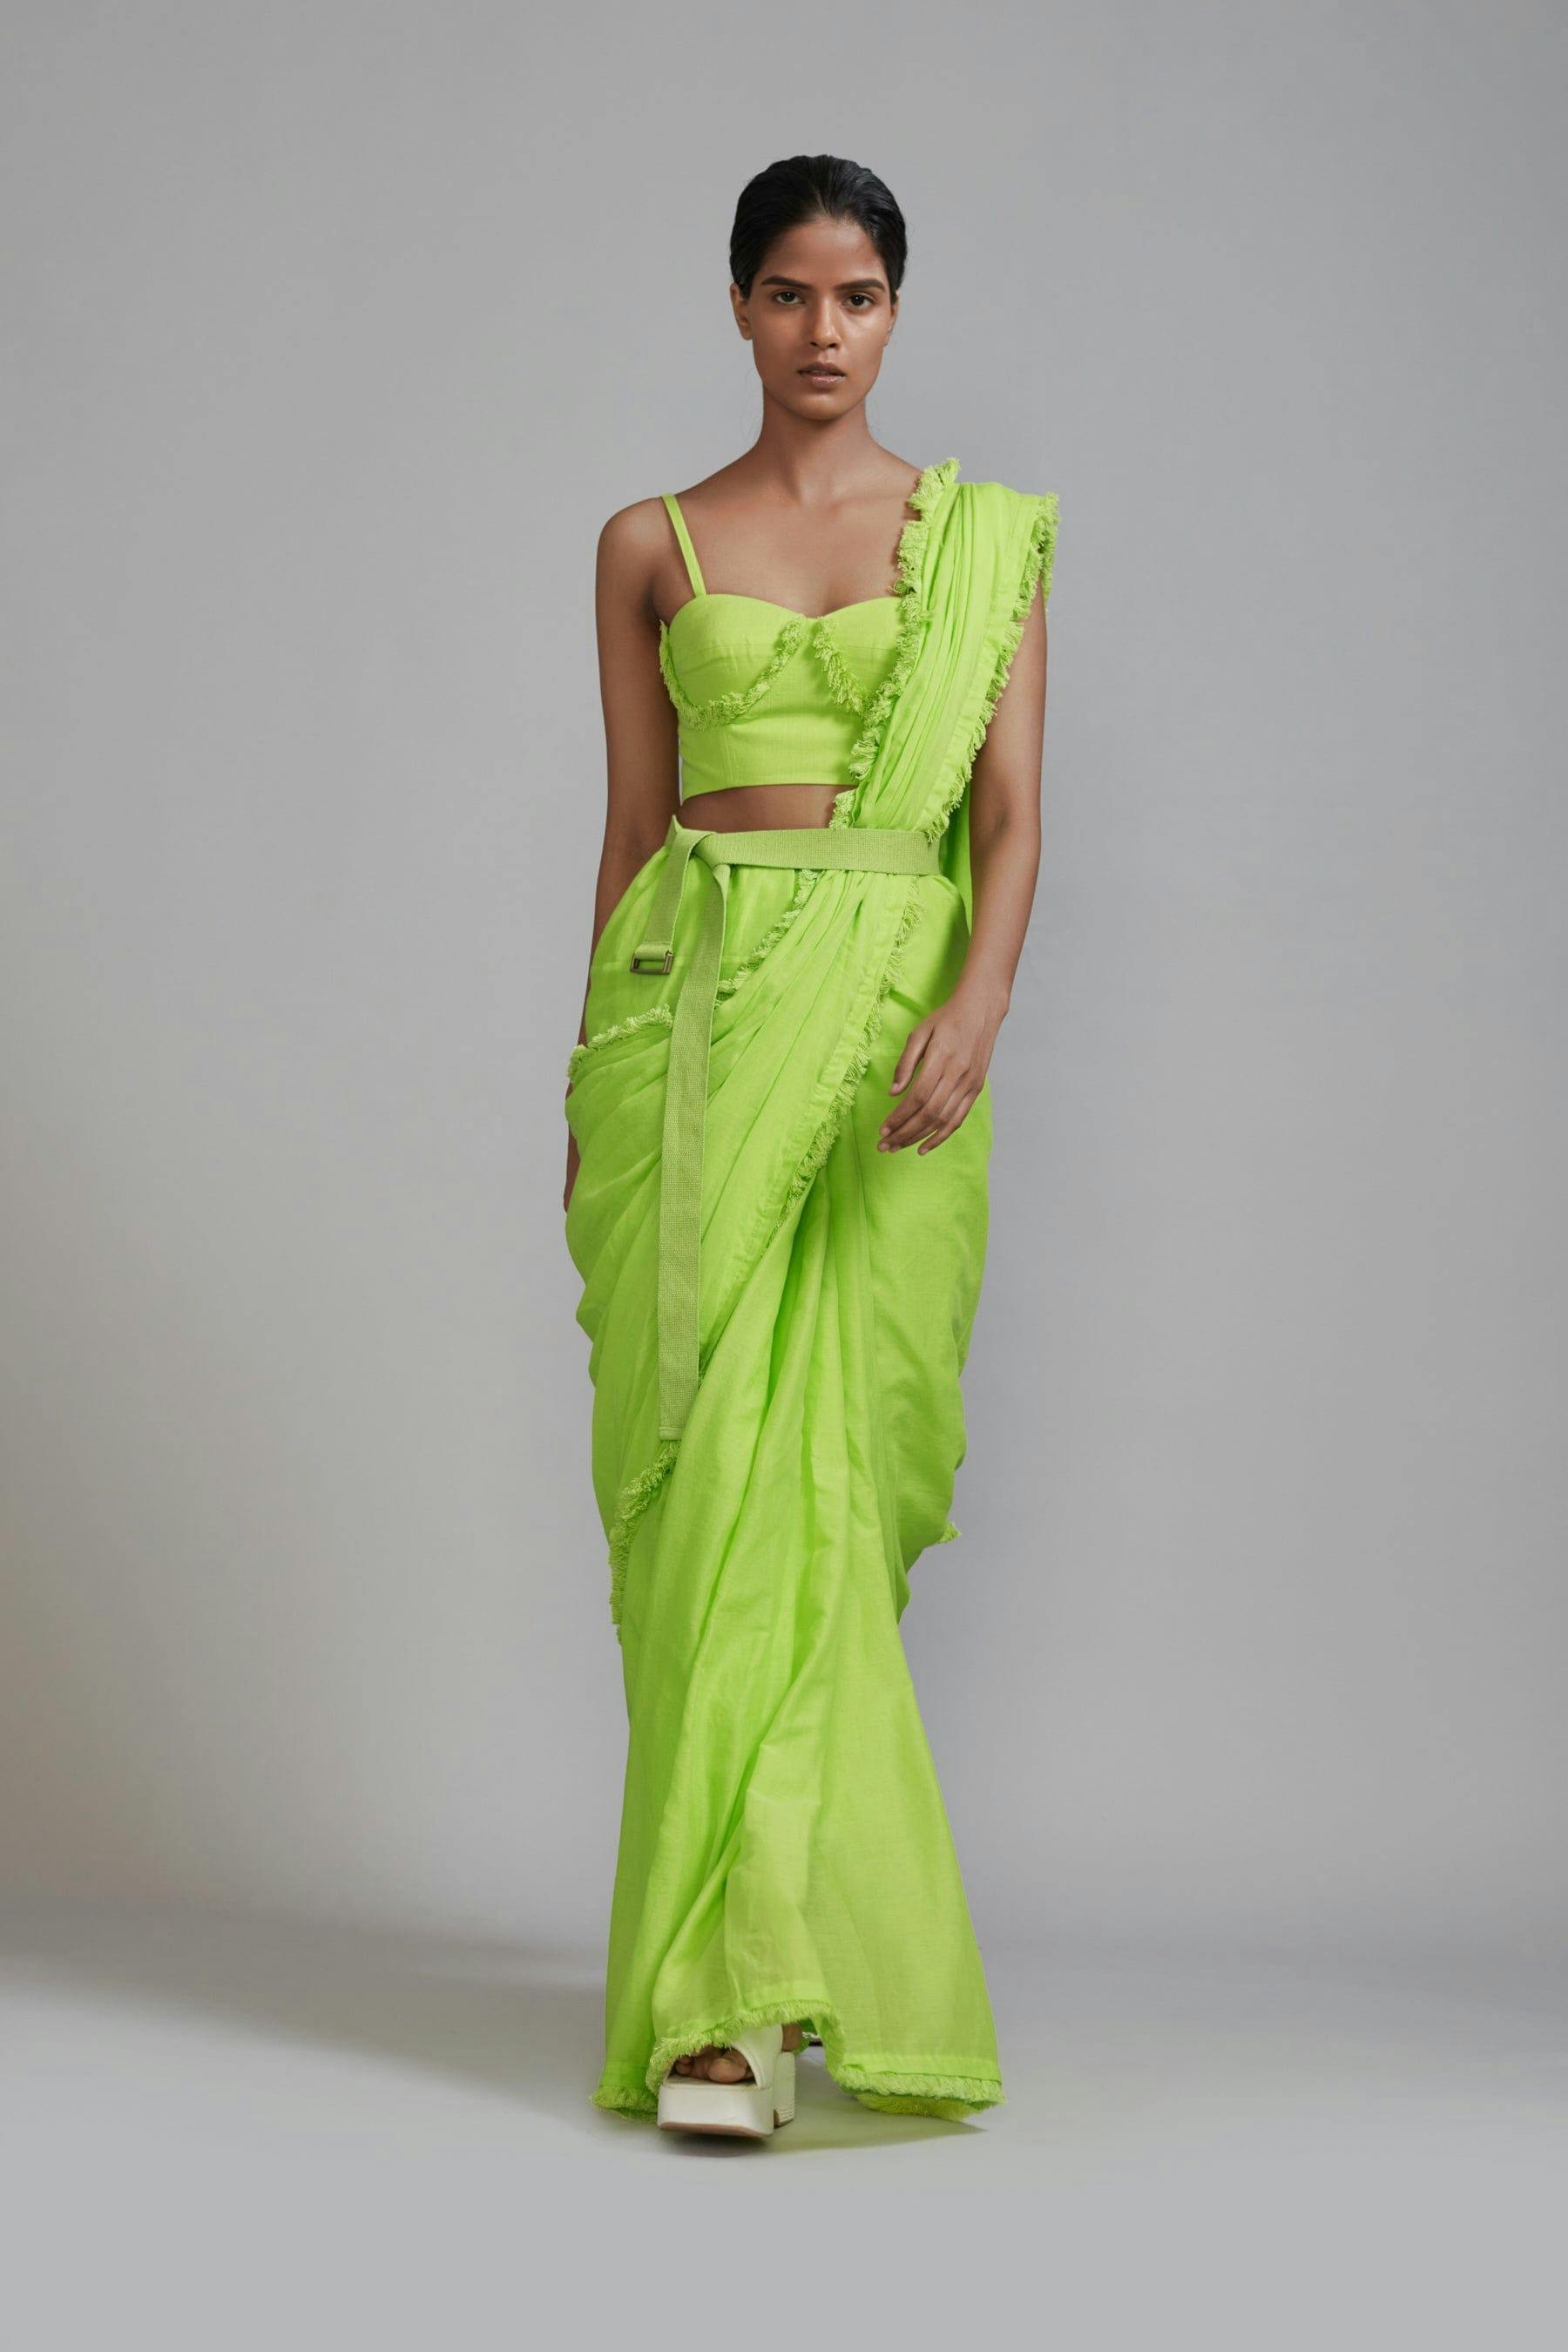 Neon Green Fringed Saree, a product by Style Mati